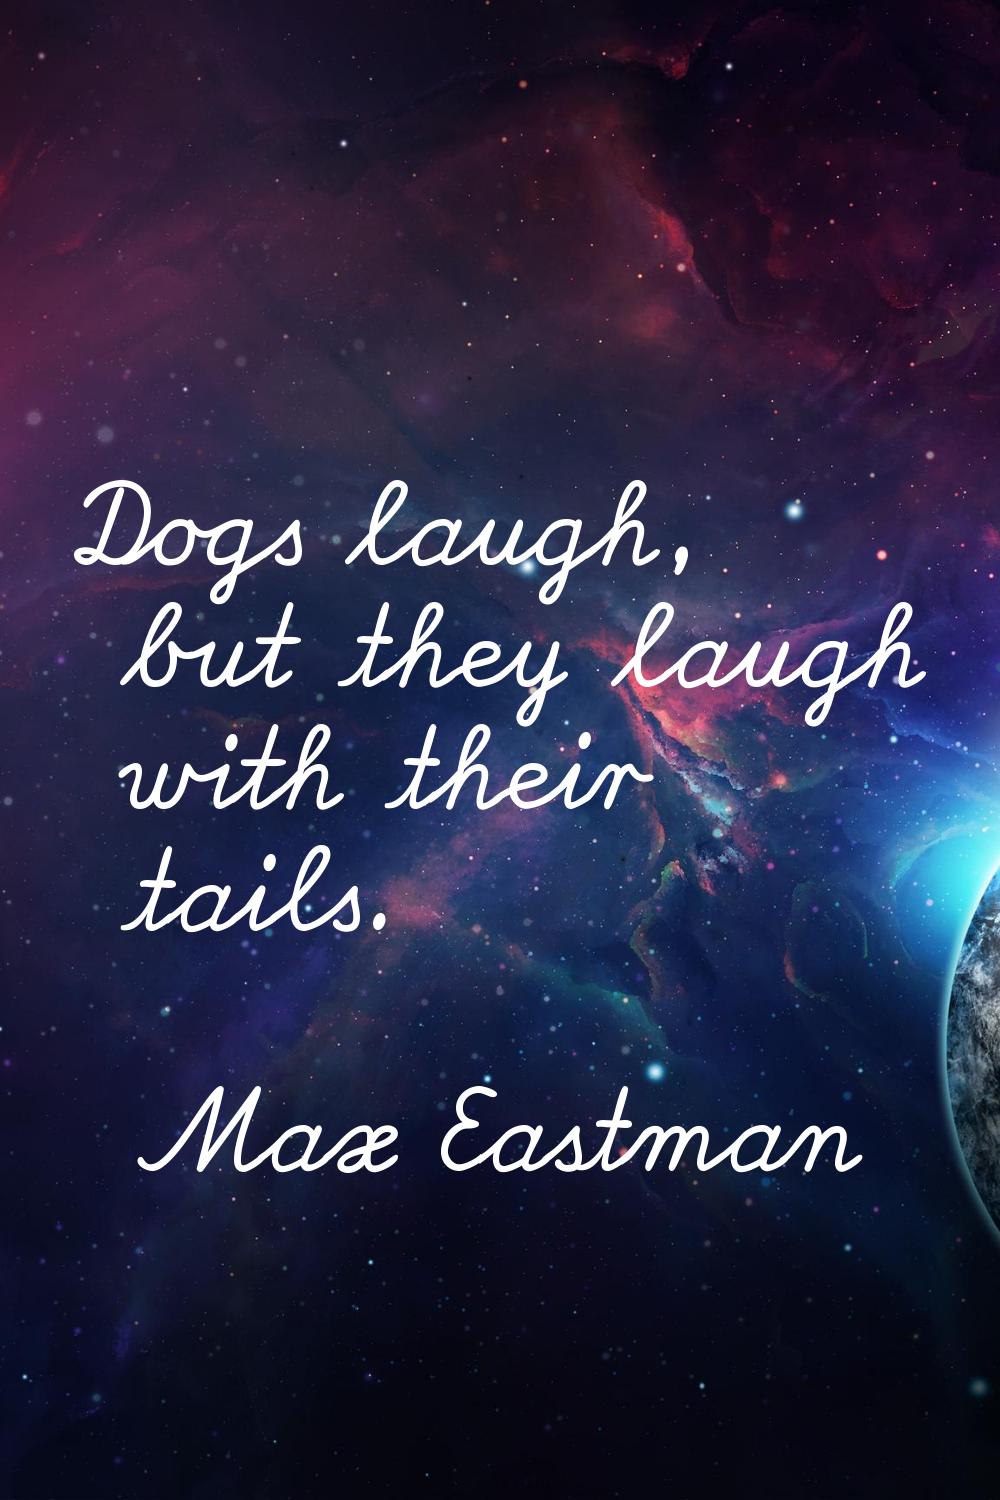 Dogs laugh, but they laugh with their tails.